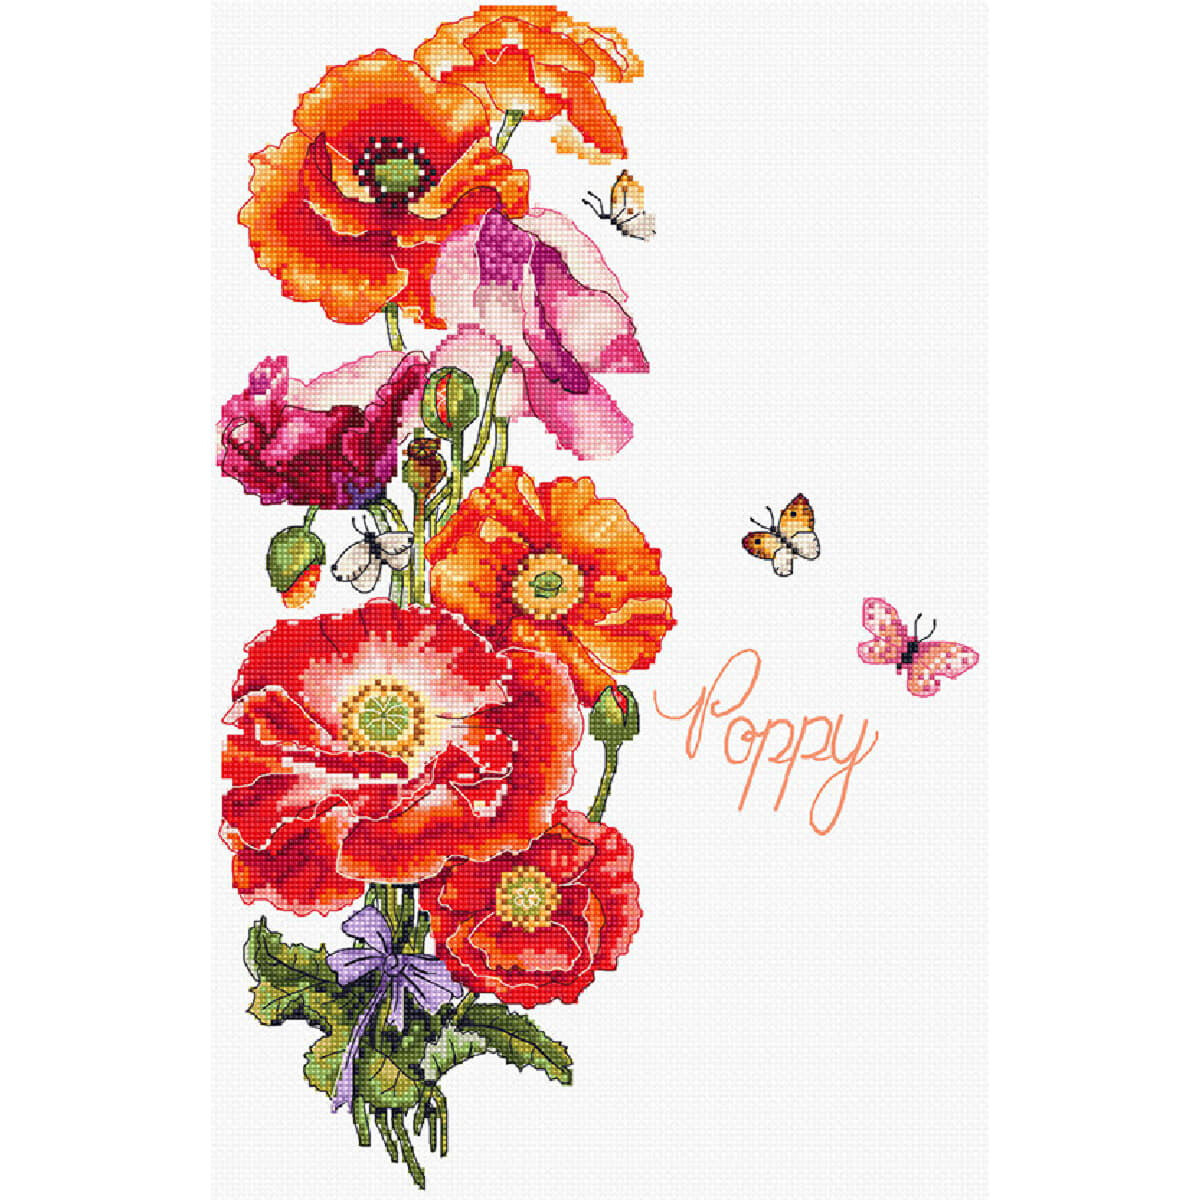 Cross-stitch embroidery with bright poppies in shades of...